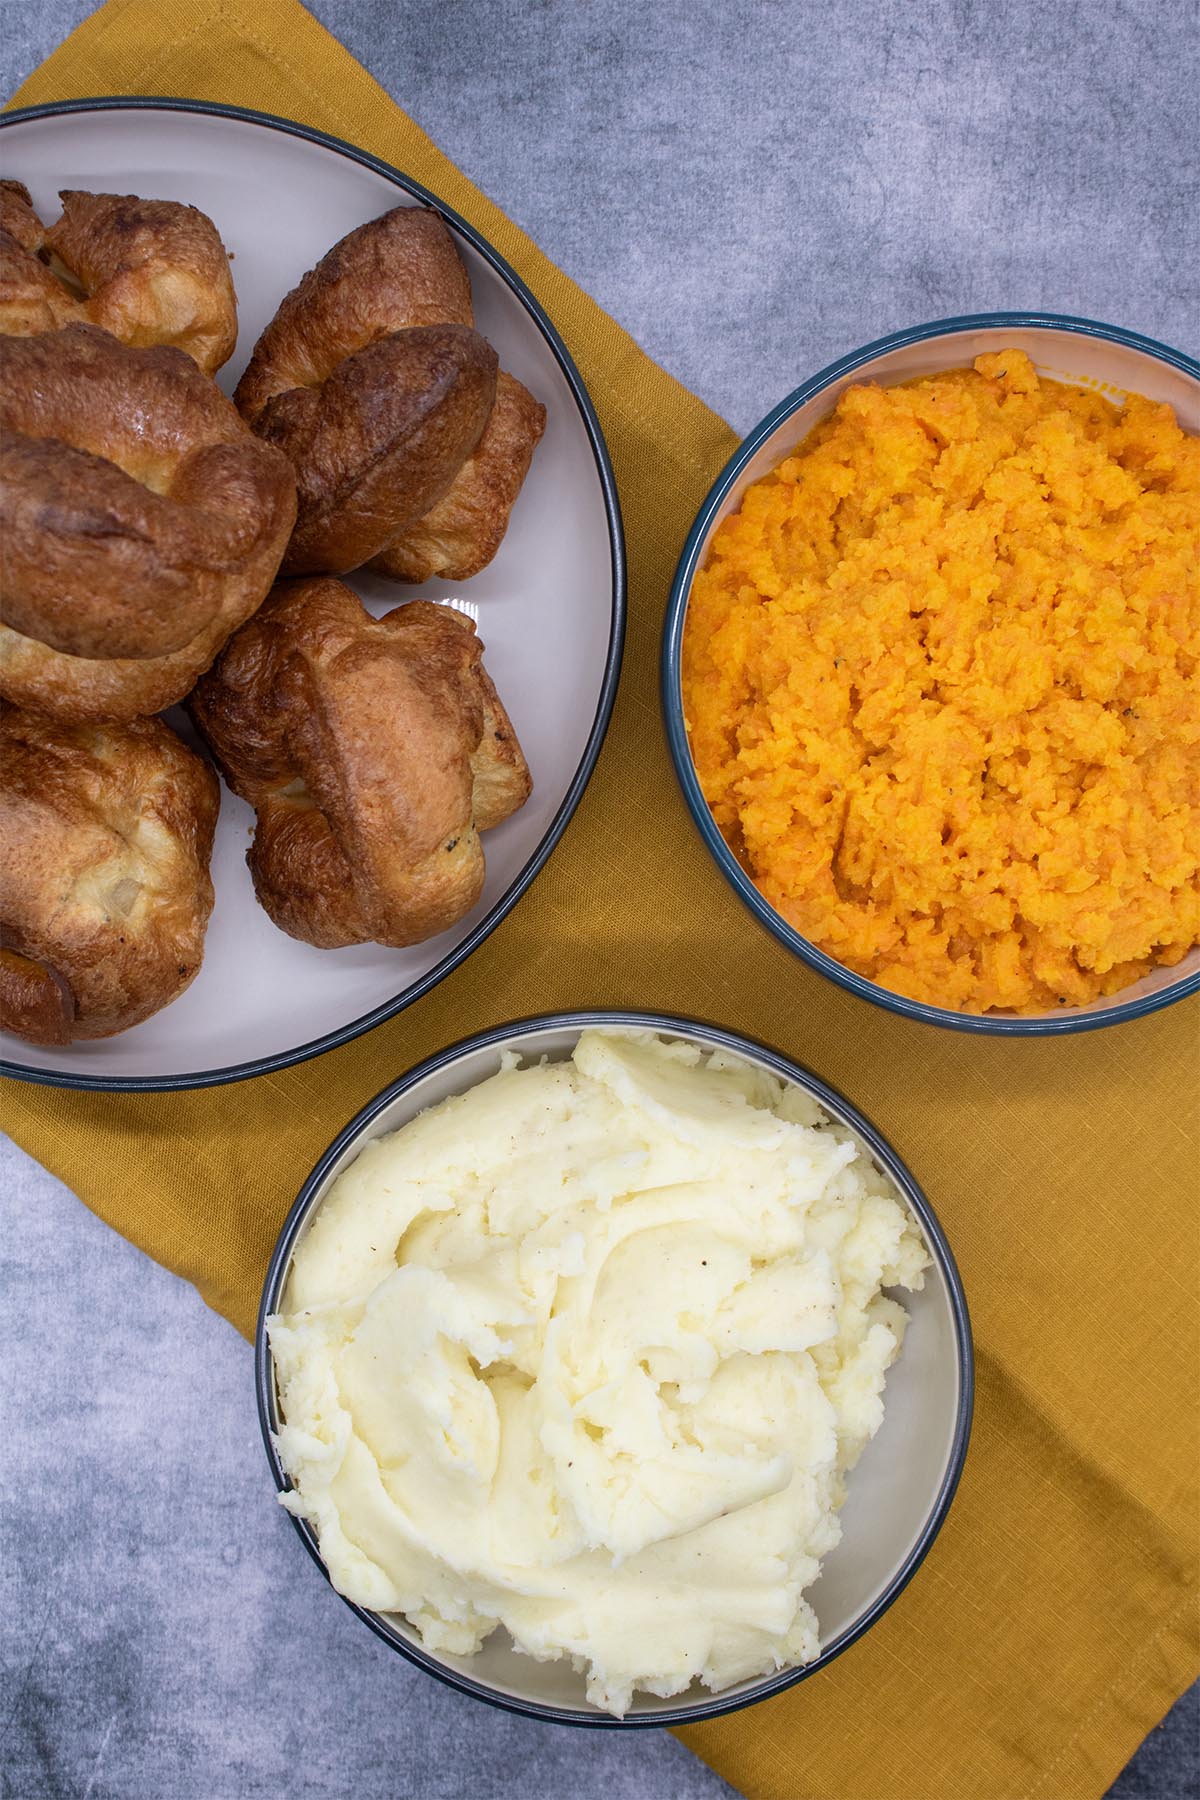 carrot and swede mash, mashed potatoes and yorkshire puddings in bowls with orange napkin